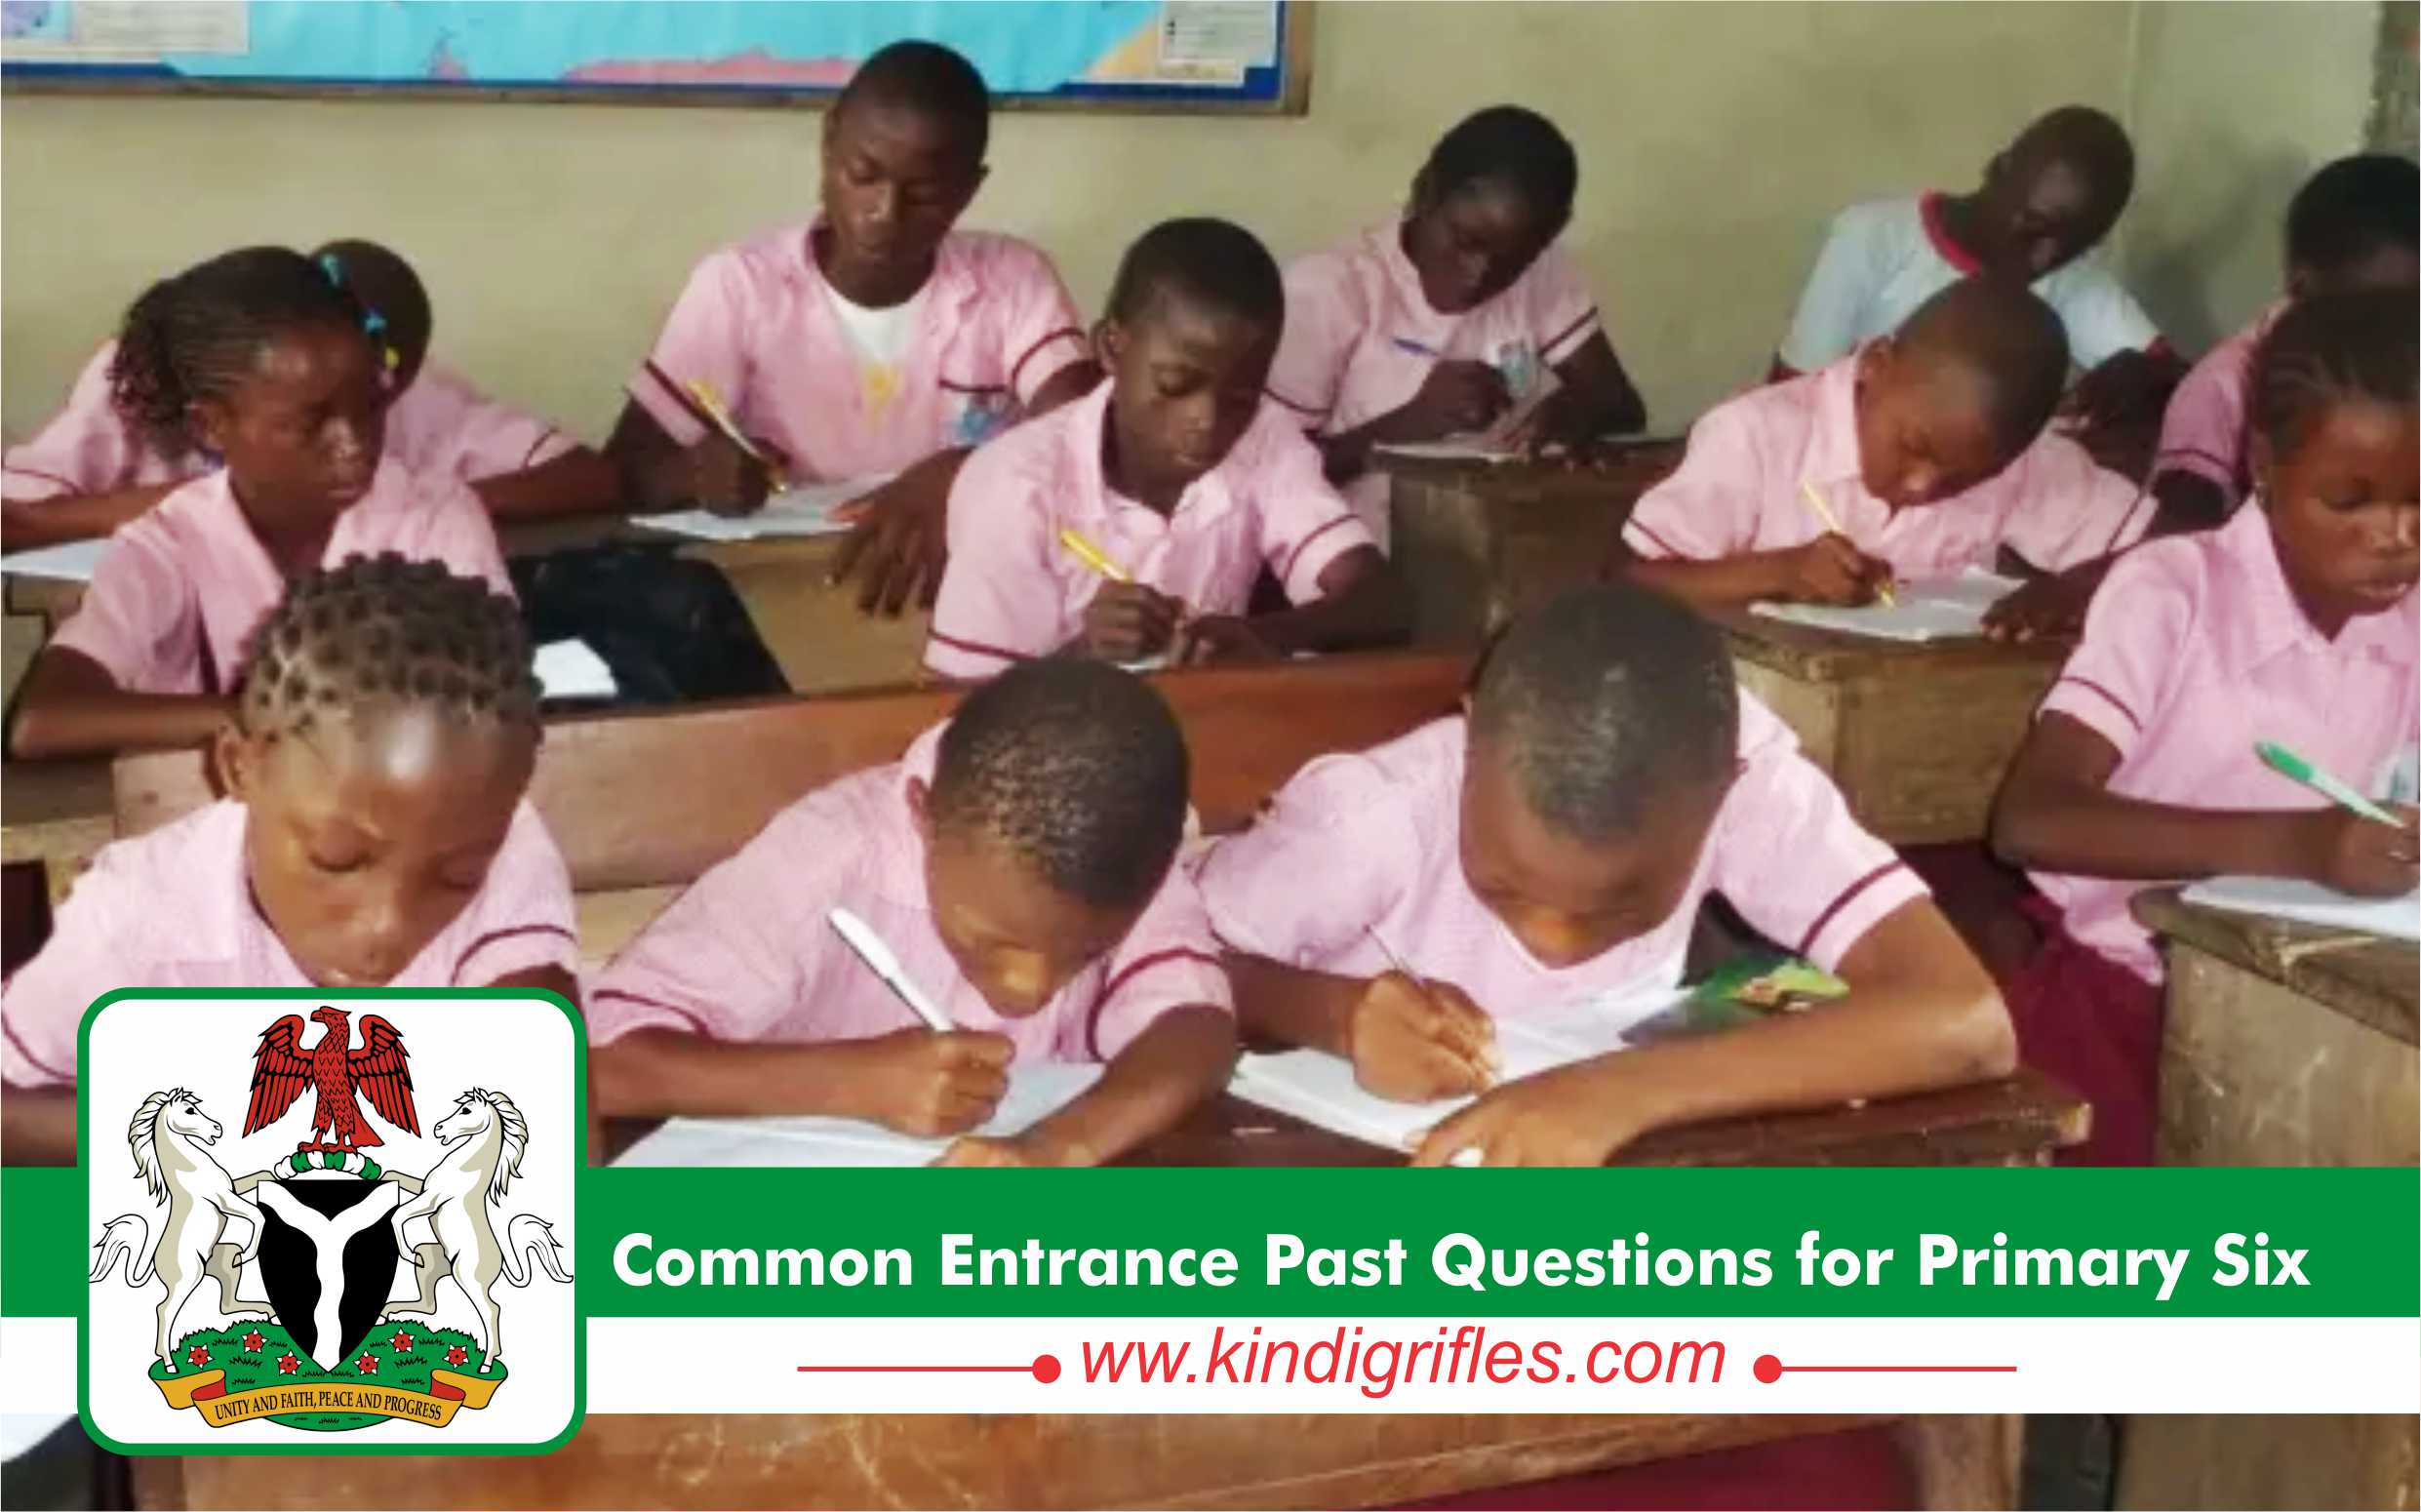 Common Entrance Past Questions for Primary Six